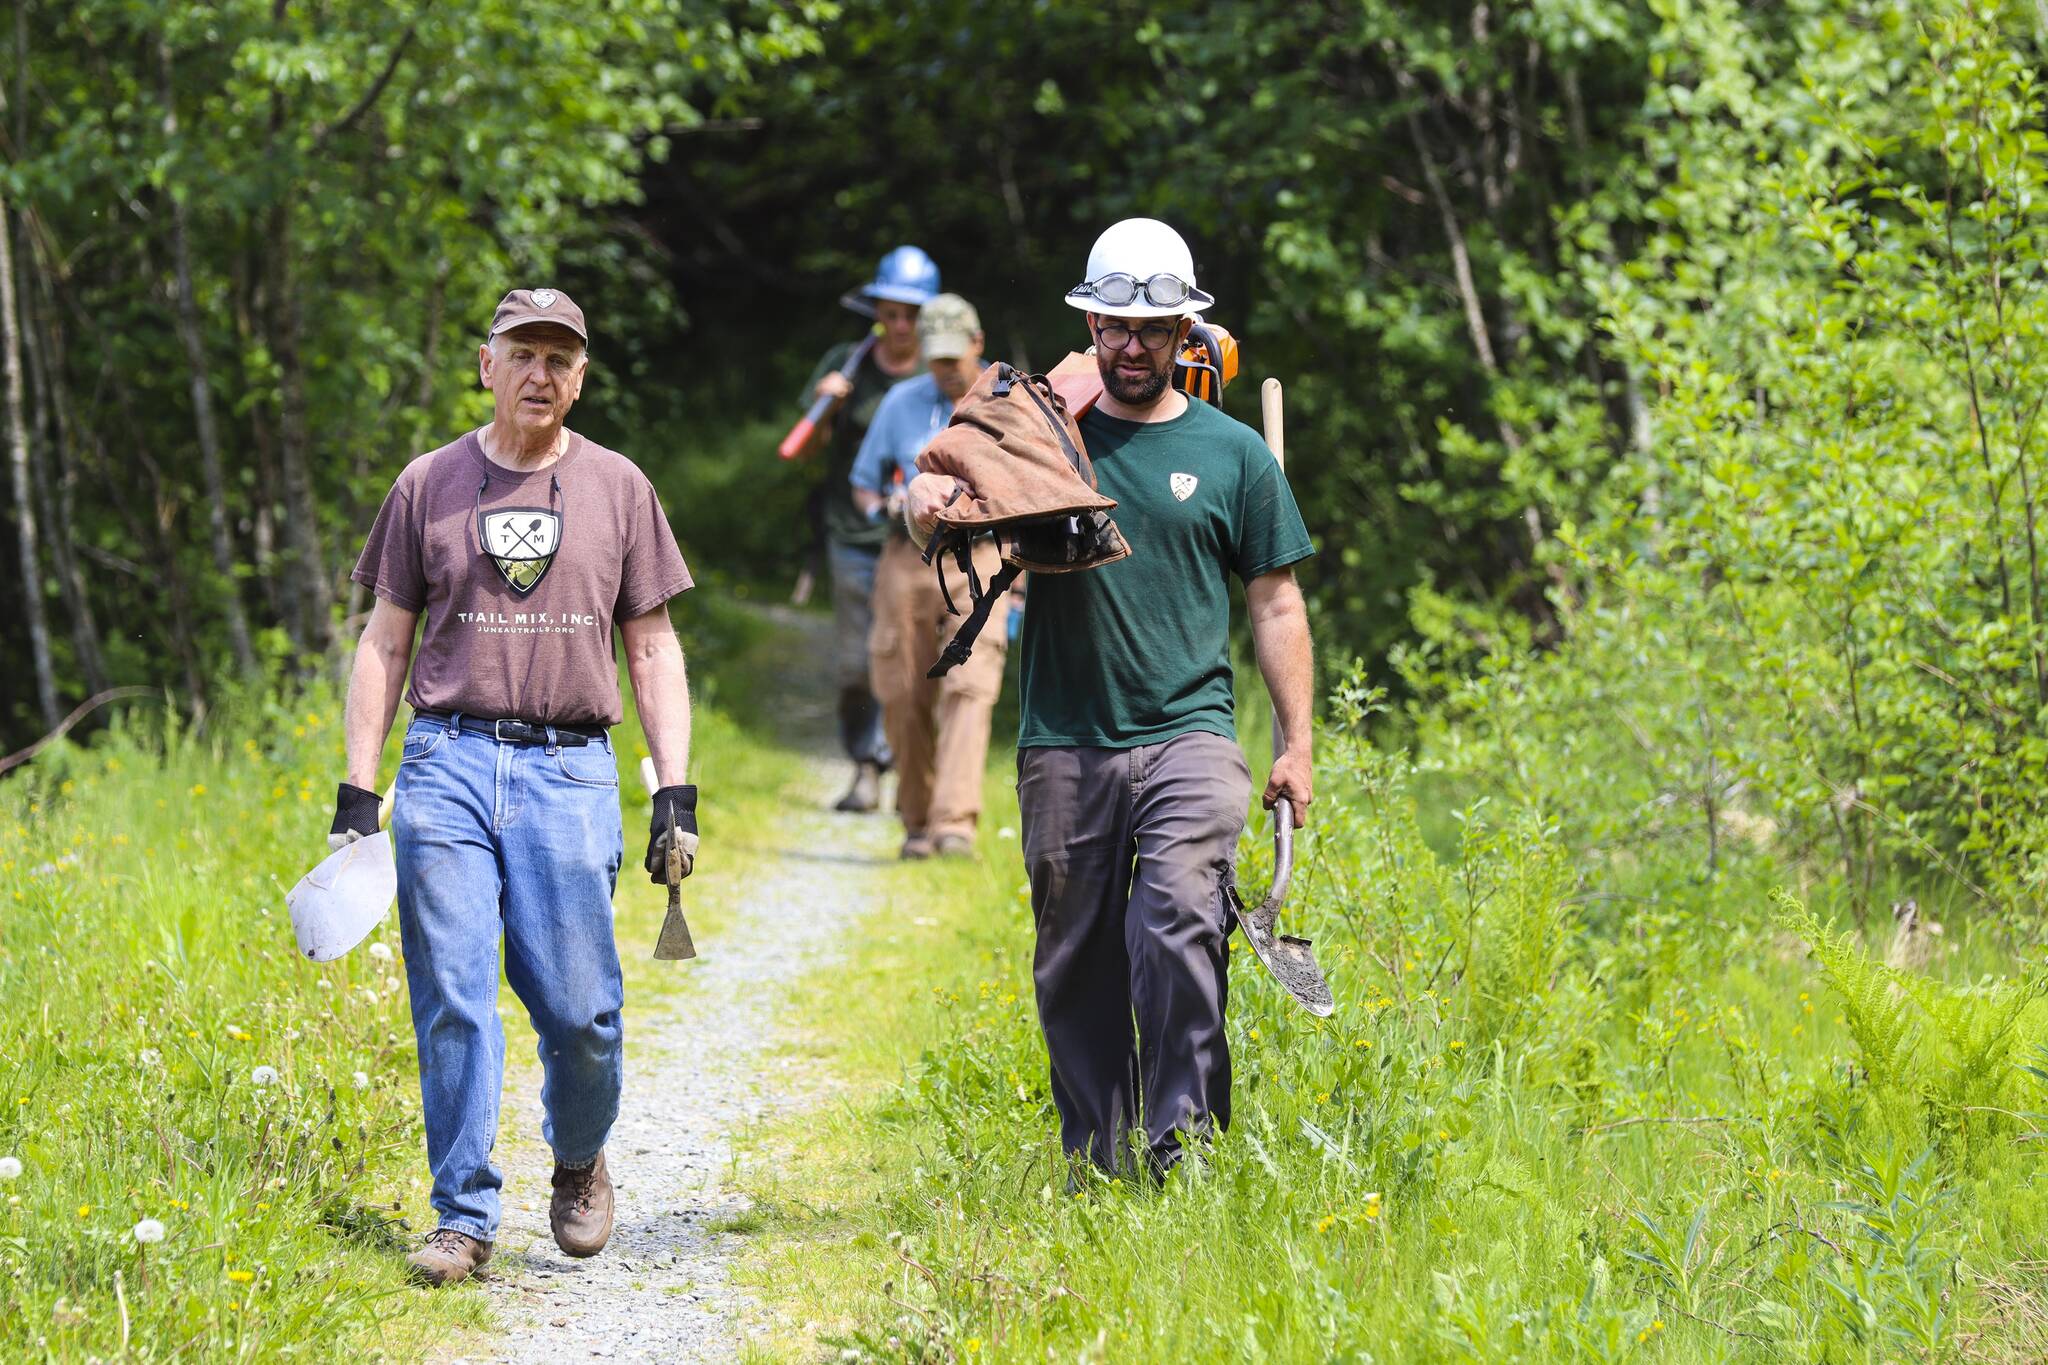 Trail Mix Inc.’s executive director, Ryan O’Shaughnessy, right, walks with Mike McKrill off Lemon Creek Trail on June 4, 2022 after taking part in the organization’s annual National Trails Day event. (Michael S. Lockett / Juneau Empire File)